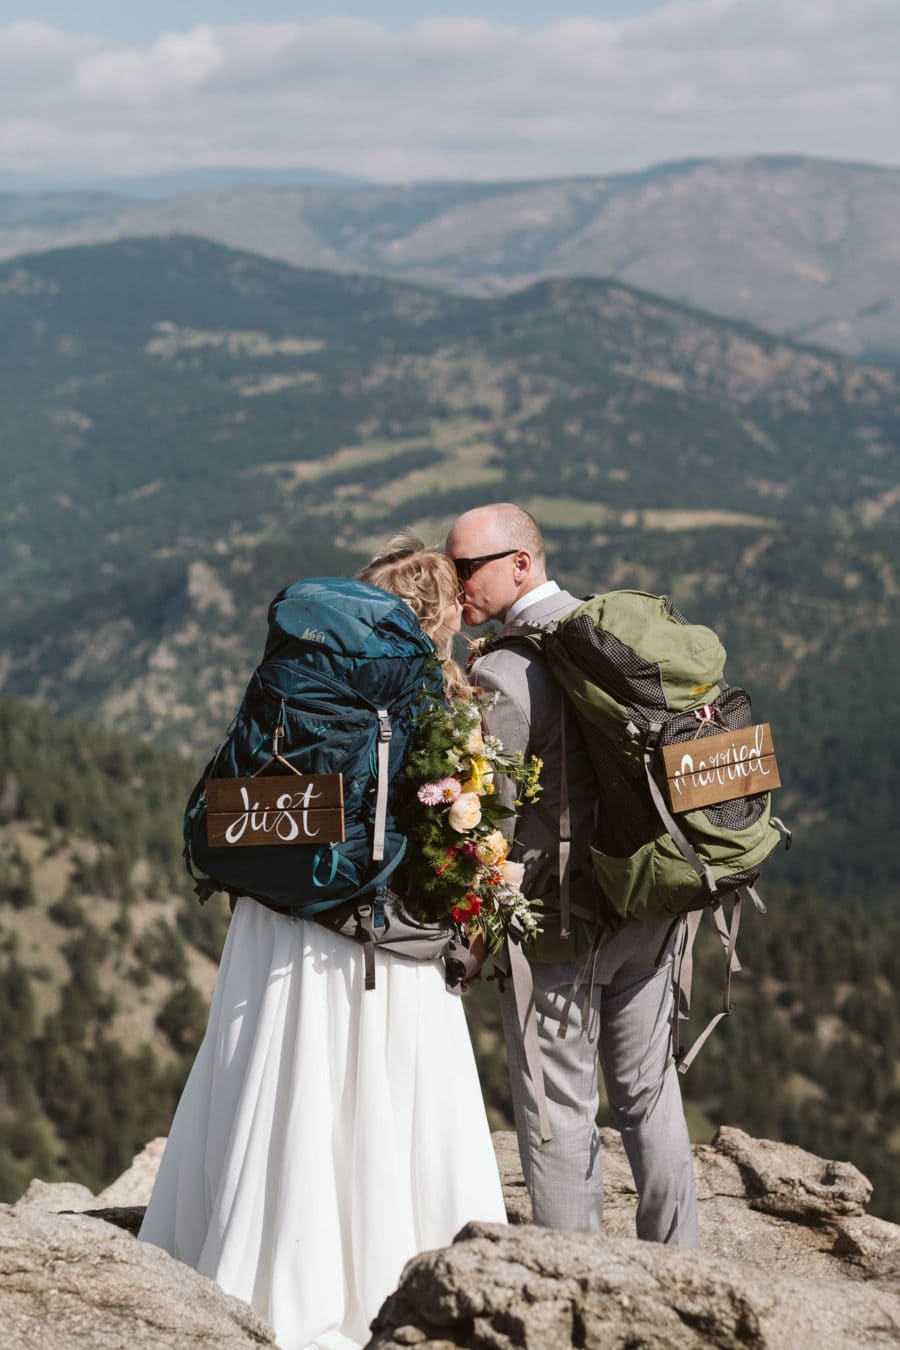 Just Married backpack signs